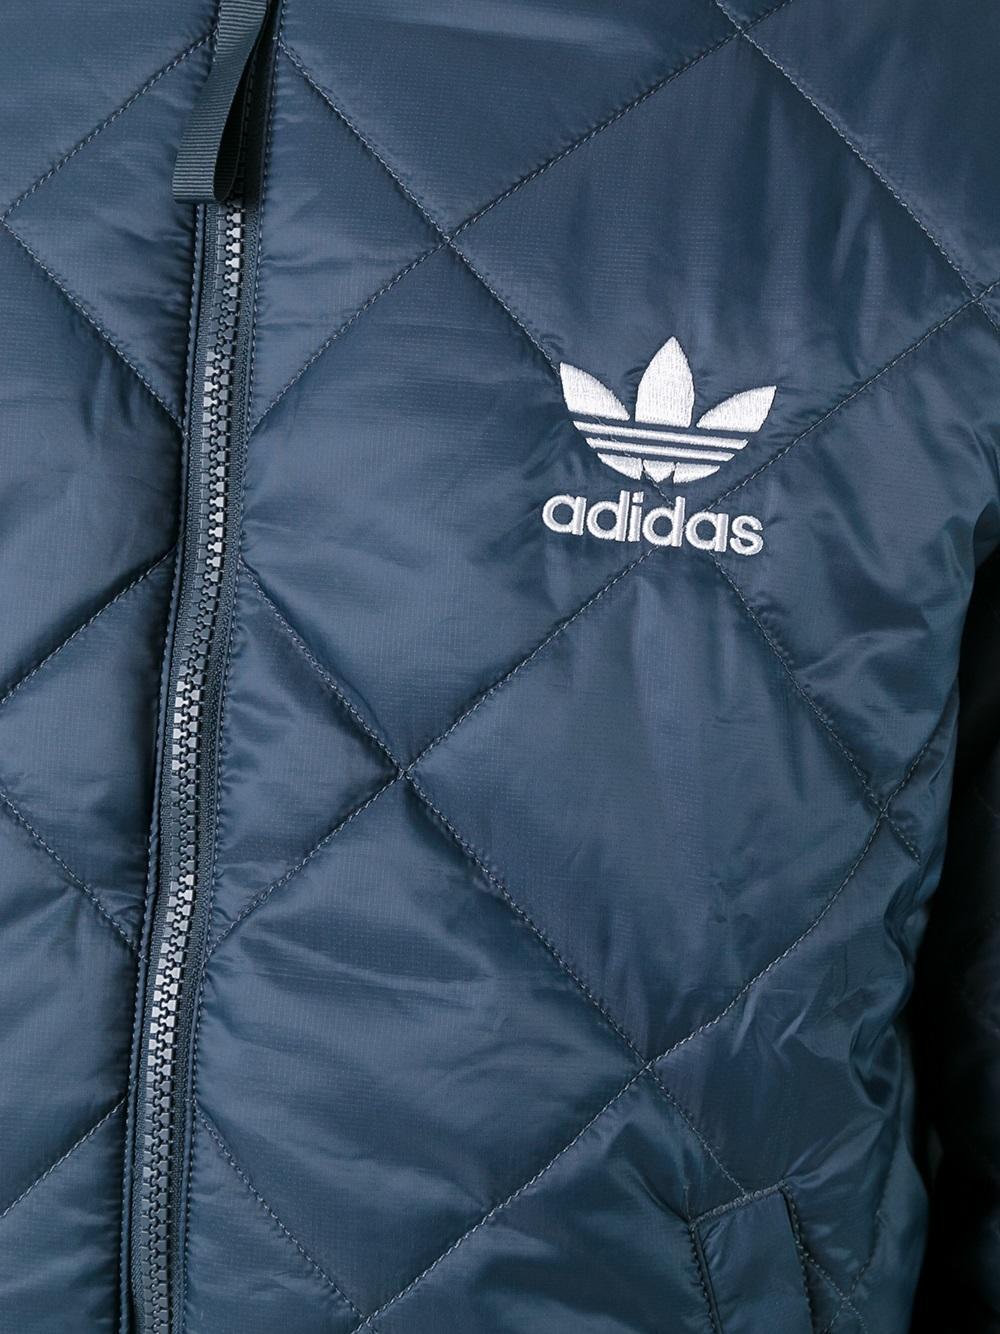 adidas Originals Synthetic 'quilted Superstar' Bomber Jacket in Blue for Men  - Lyst